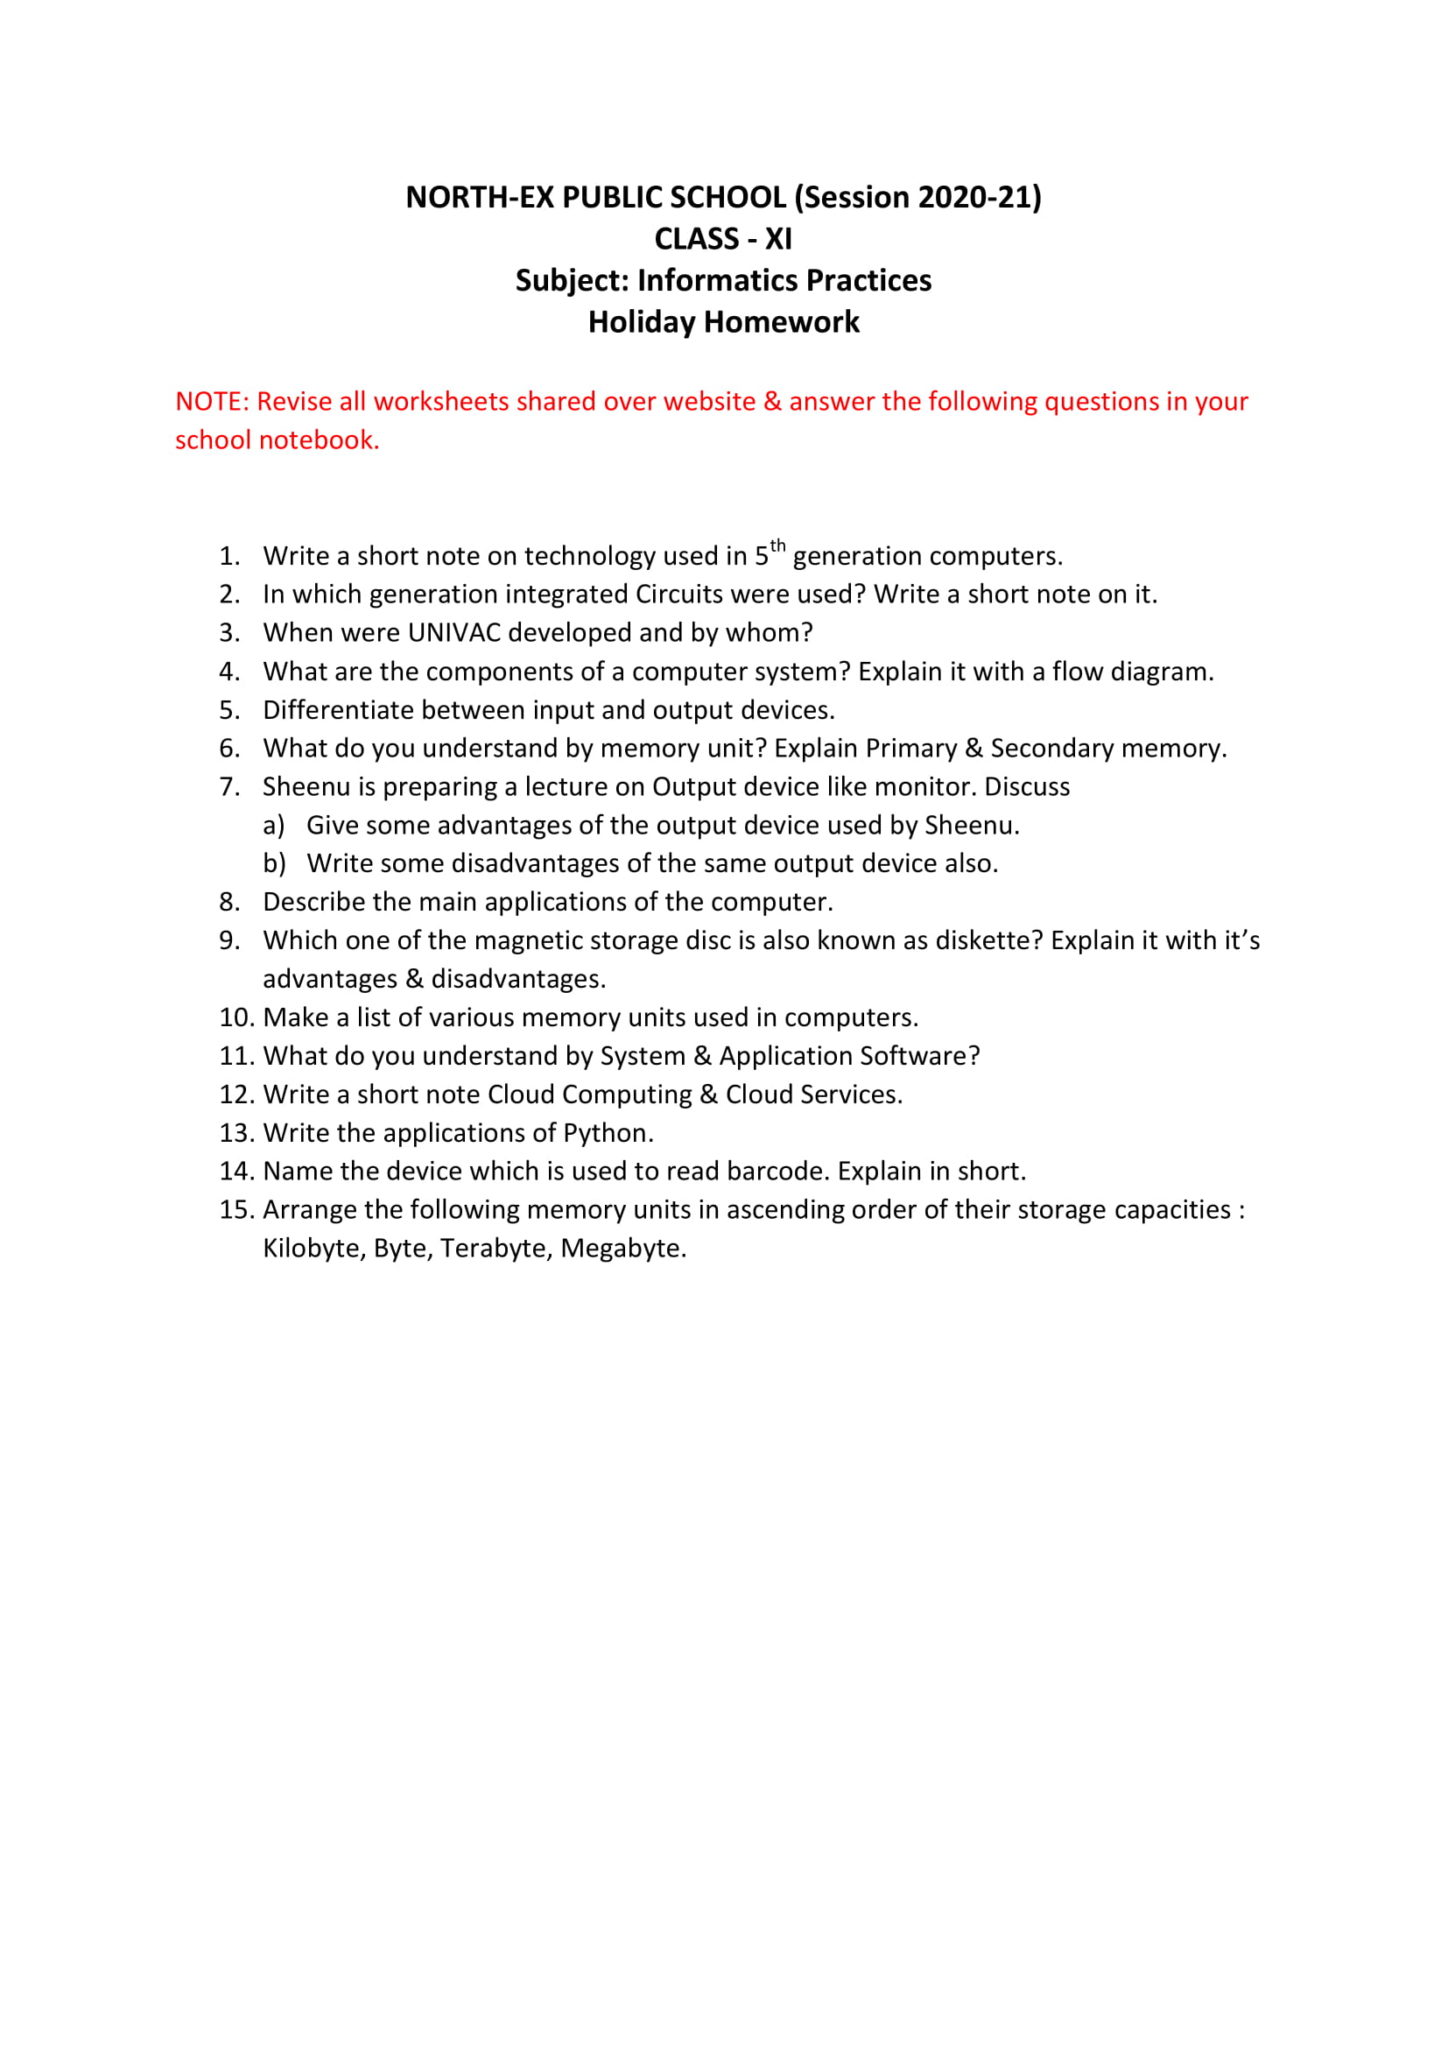 holiday homework for class 11 business studies